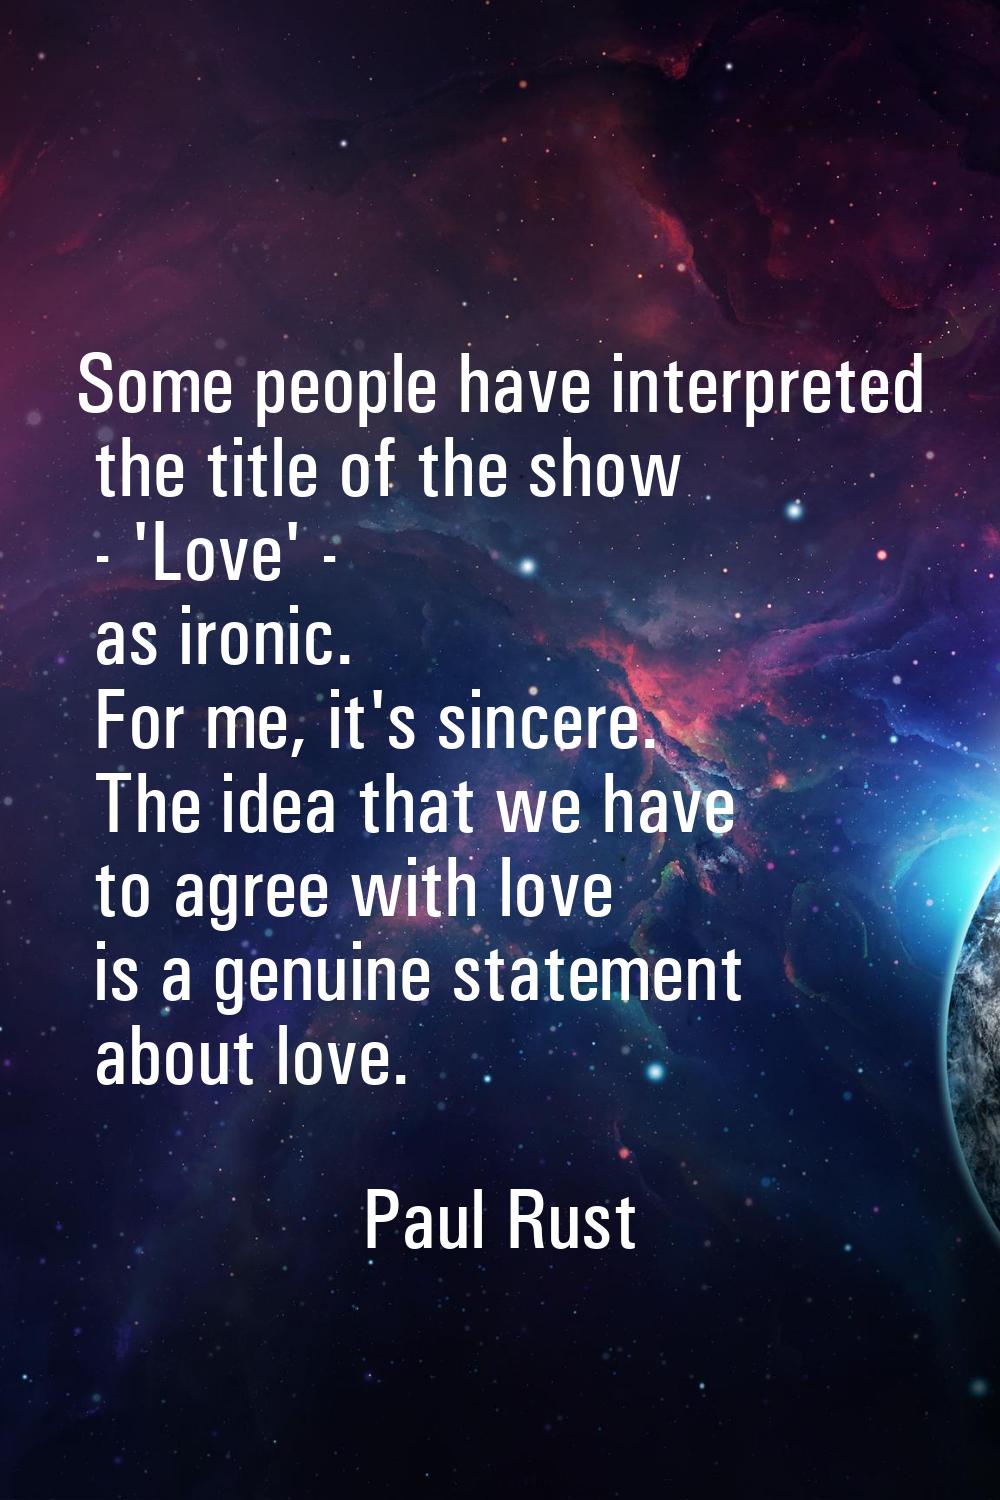 Some people have interpreted the title of the show - 'Love' - as ironic. For me, it's sincere. The 